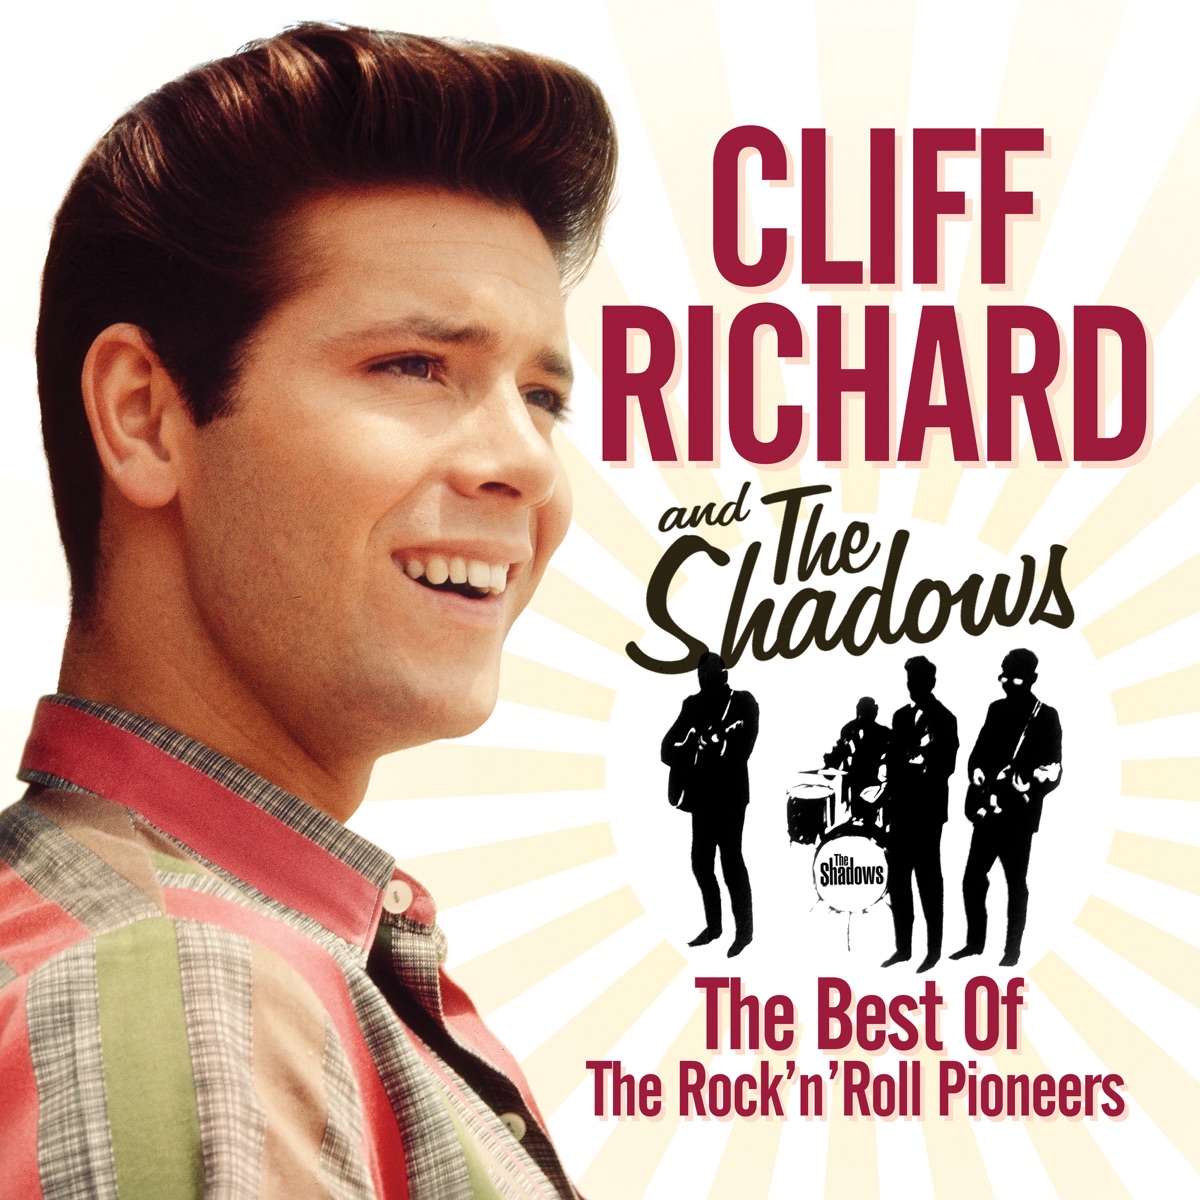 Rock 'n' Roll Juvenile (Remastered) by Cliff Richard on Apple Music